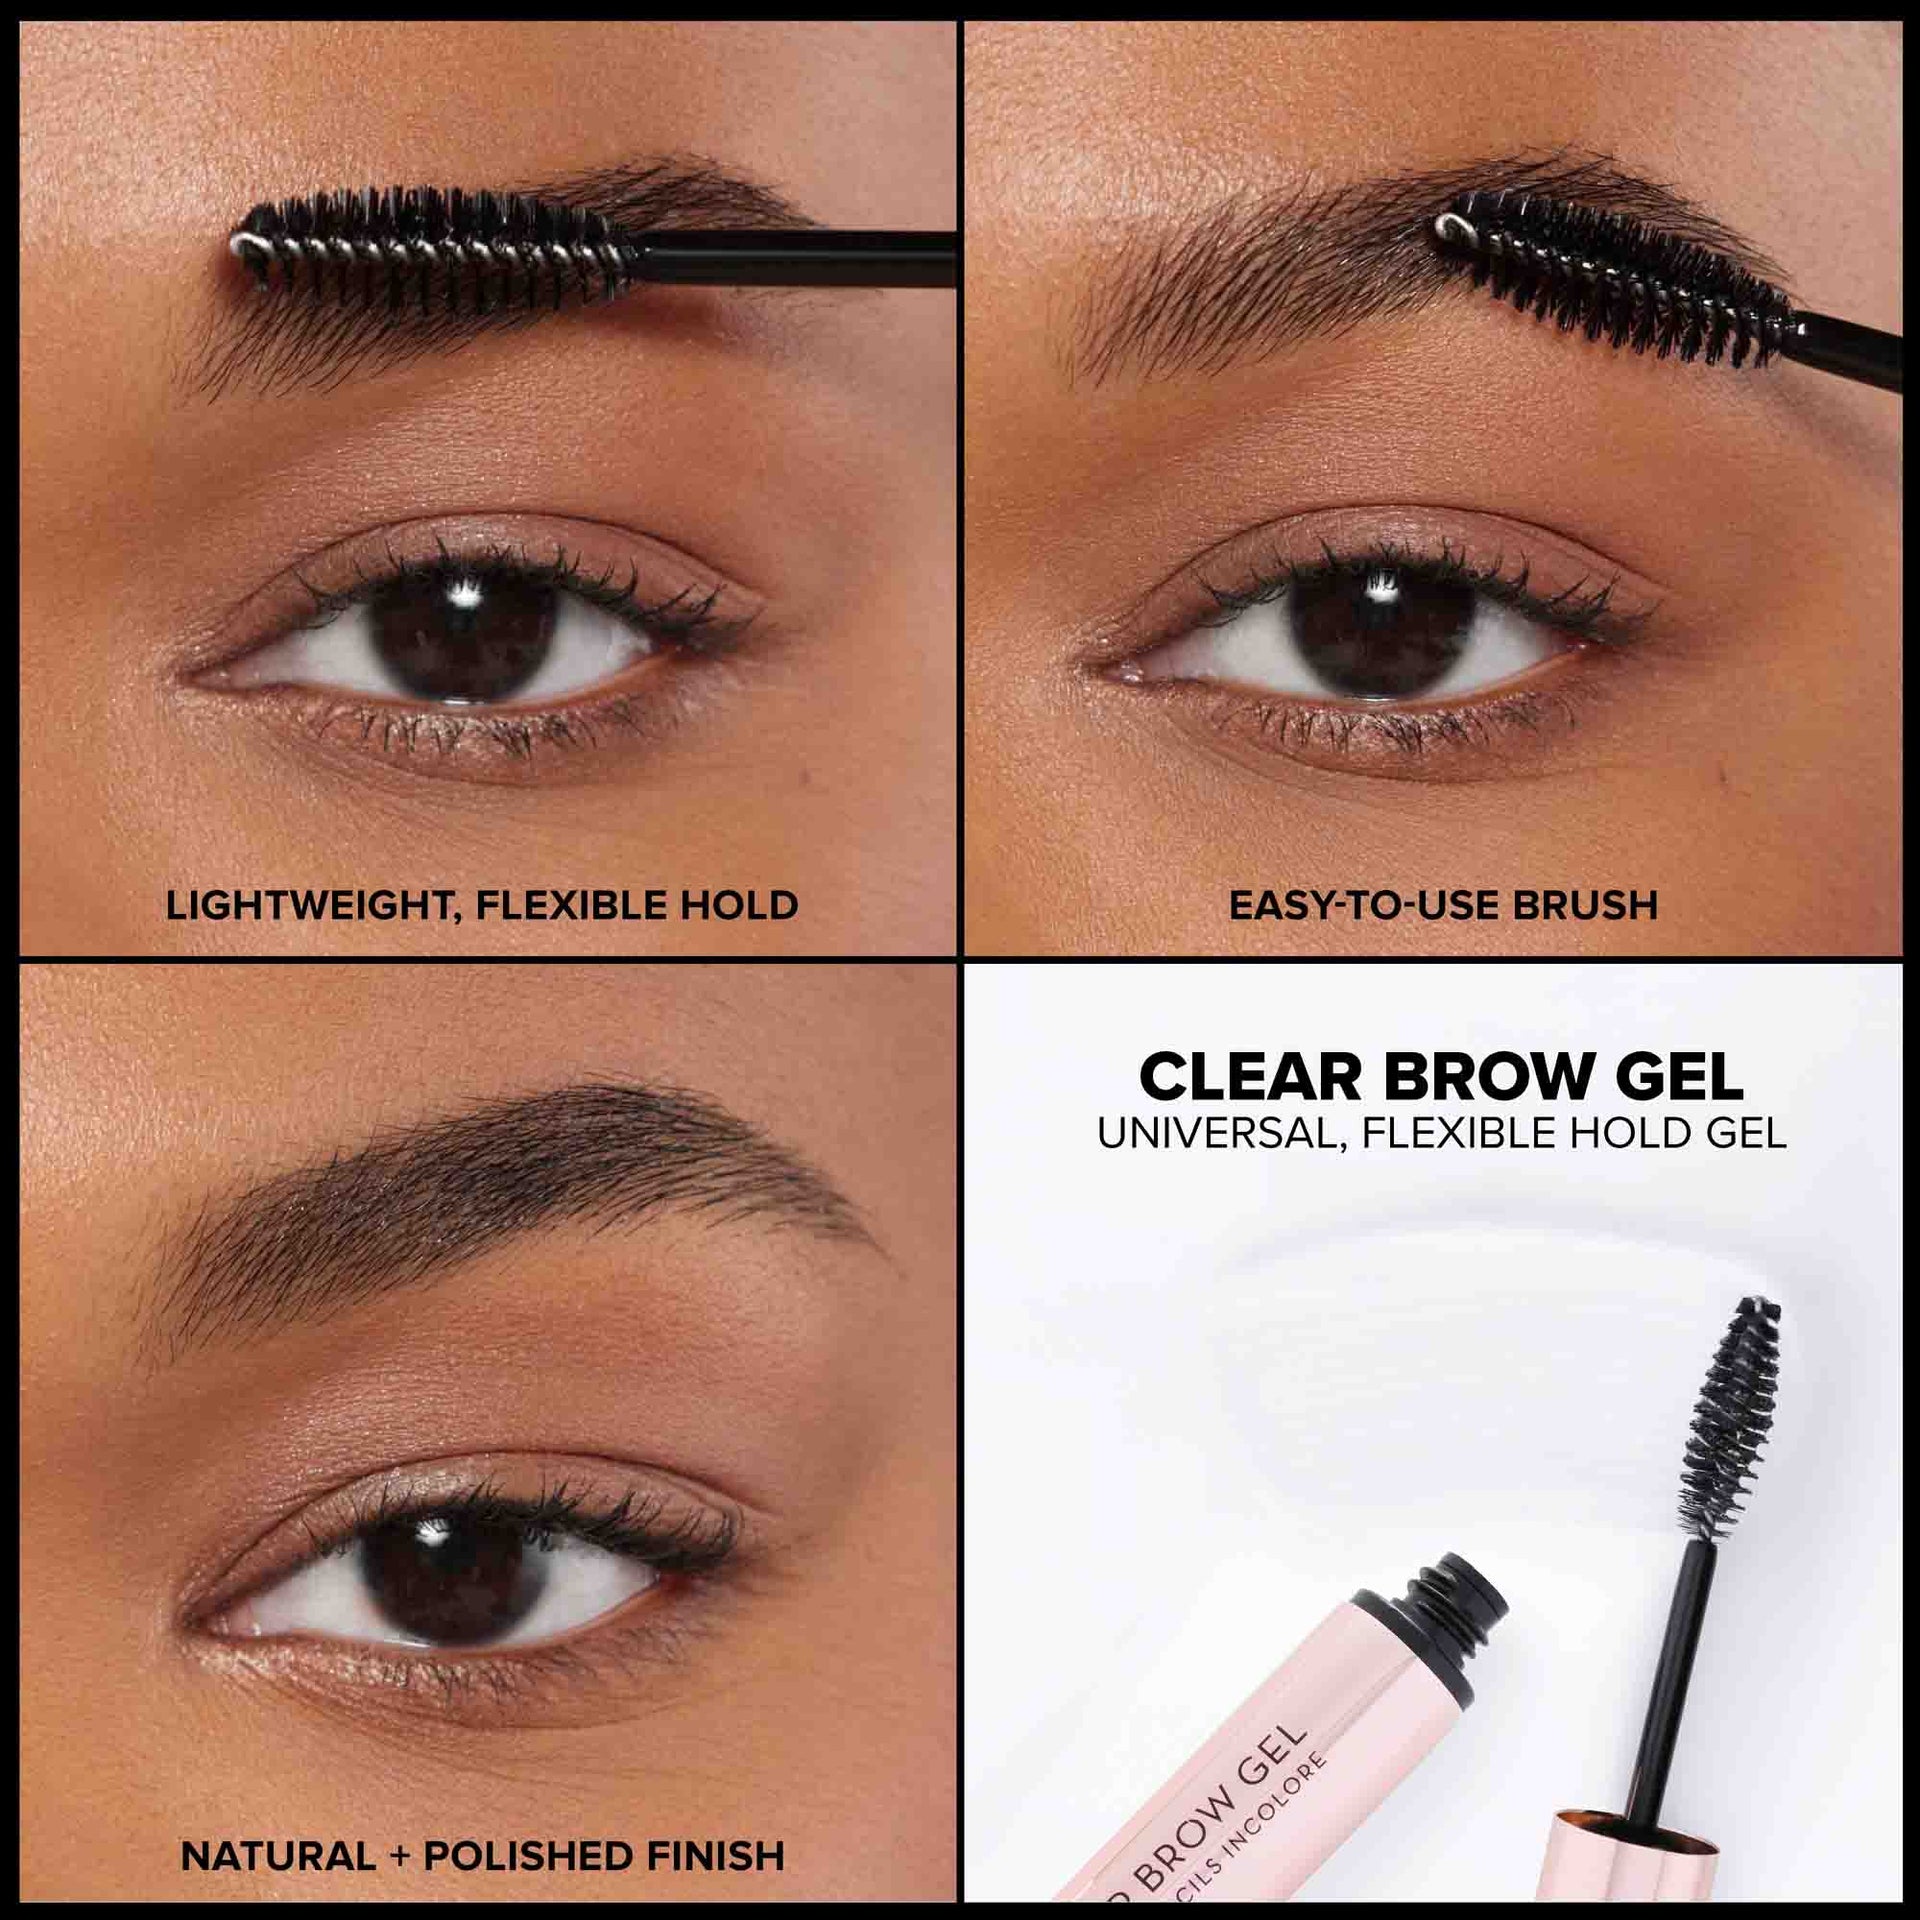 Clear Brow Gel Features